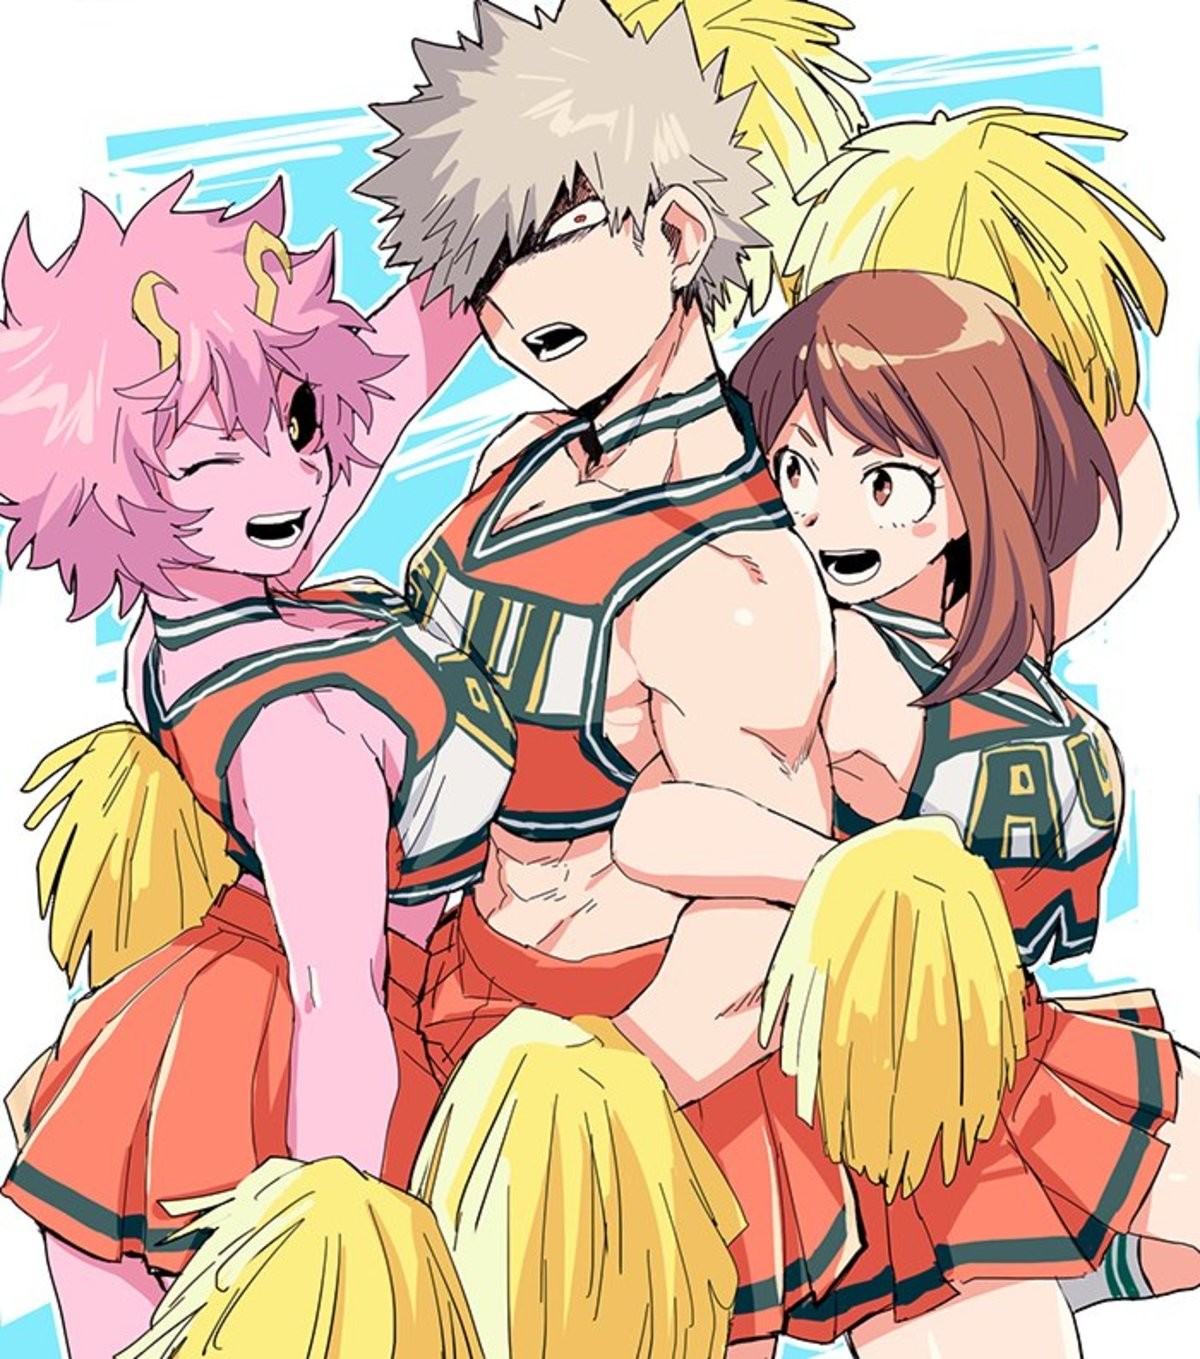 Type-A(ggressive) personality. .. &gt;This wierd mixture of high testosterone and high feminization of Bakugo